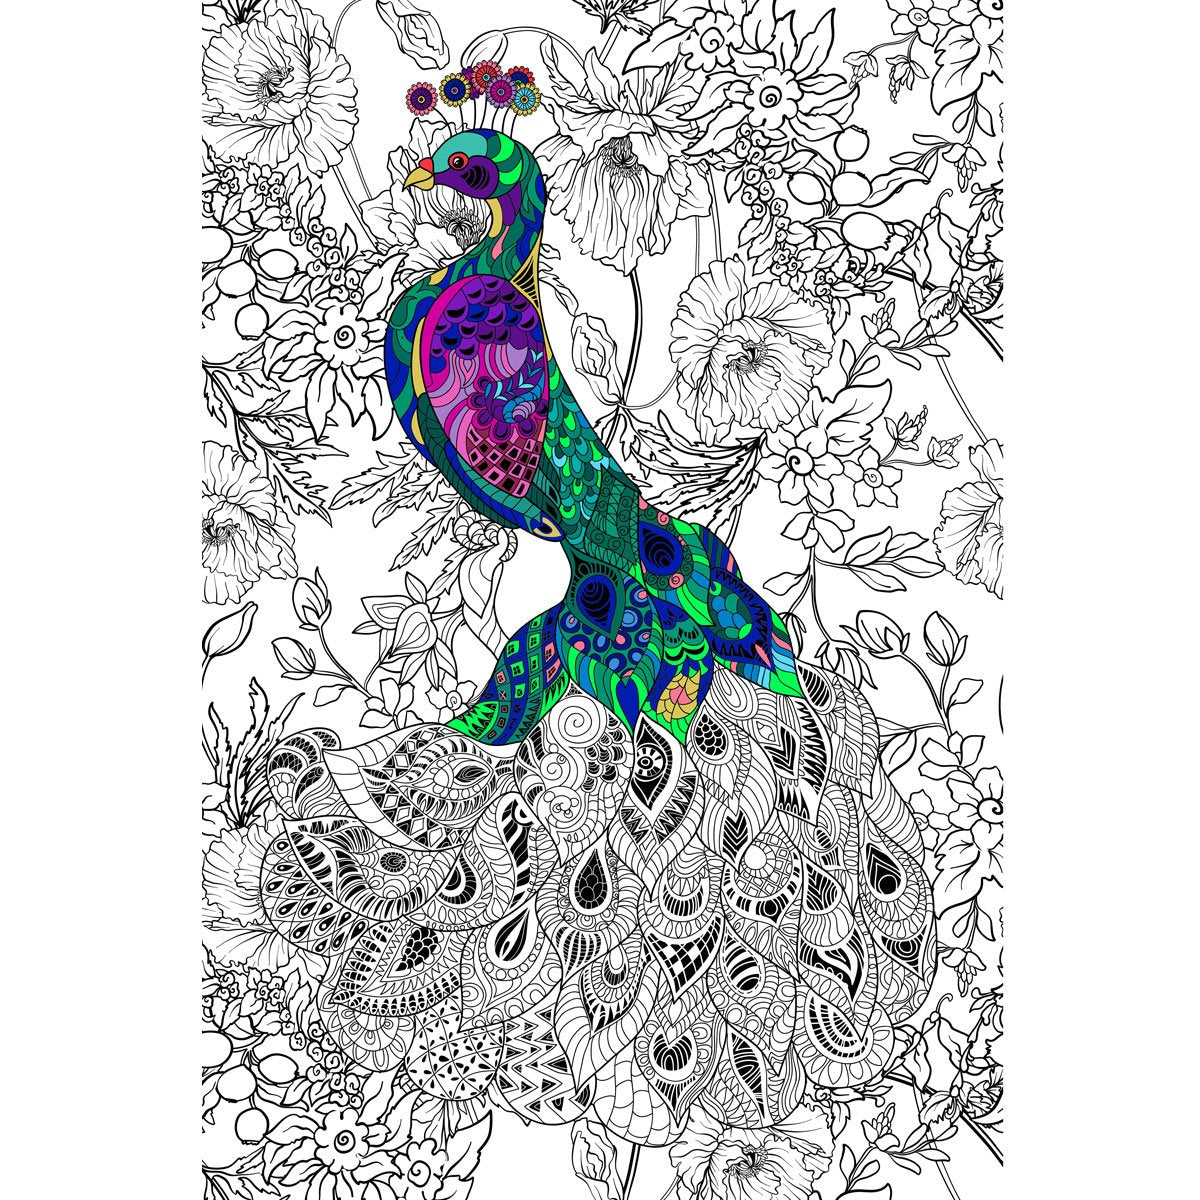 Great2bColorful  - Polish Peacock Coloring Poster